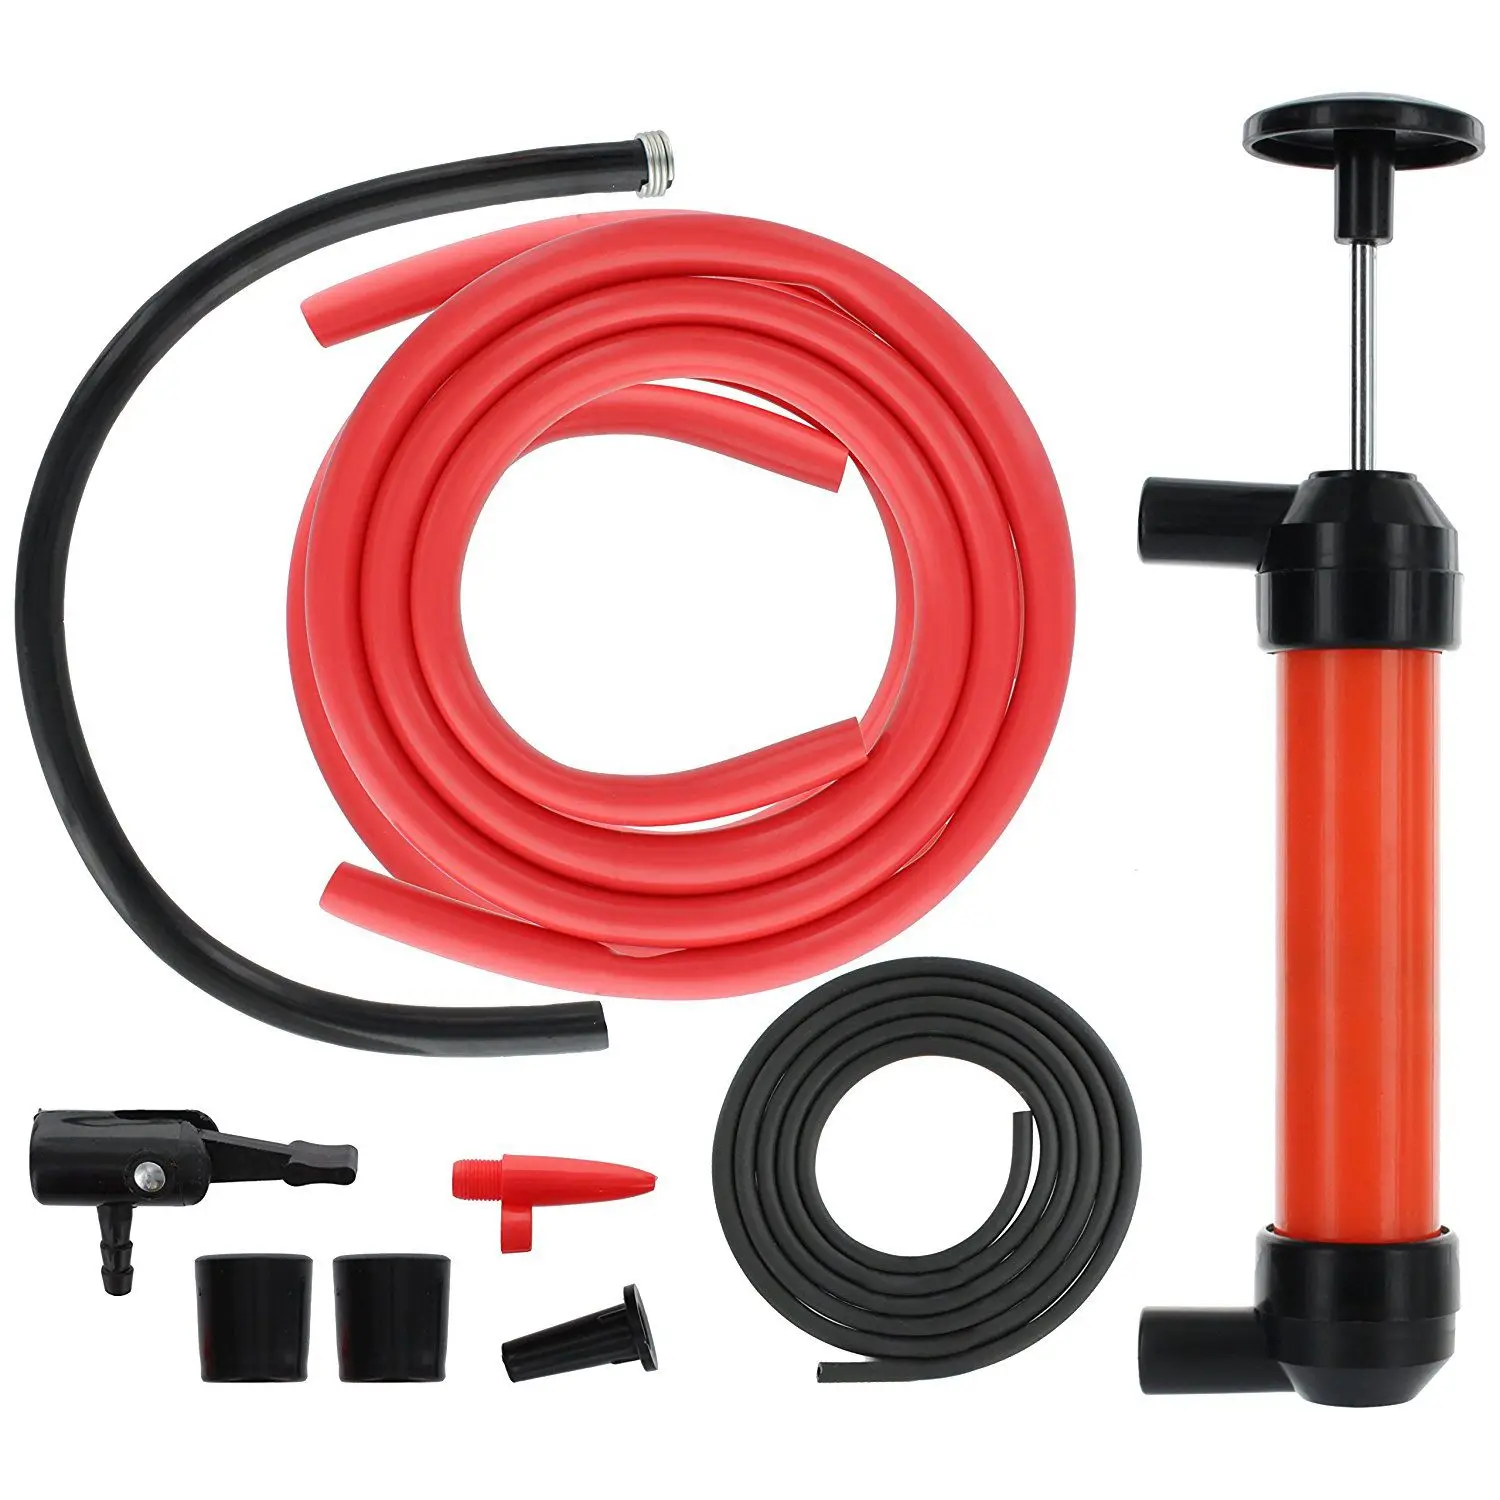 Extractor Suction Emergency Tool Kits for Motorbike Auto car Accessory Alemin Fluid Gas Transfer Pump,Manual Oil Extractor piple,Hand Oil Water Pumps,Portable Car Siphon Hose for Travel 